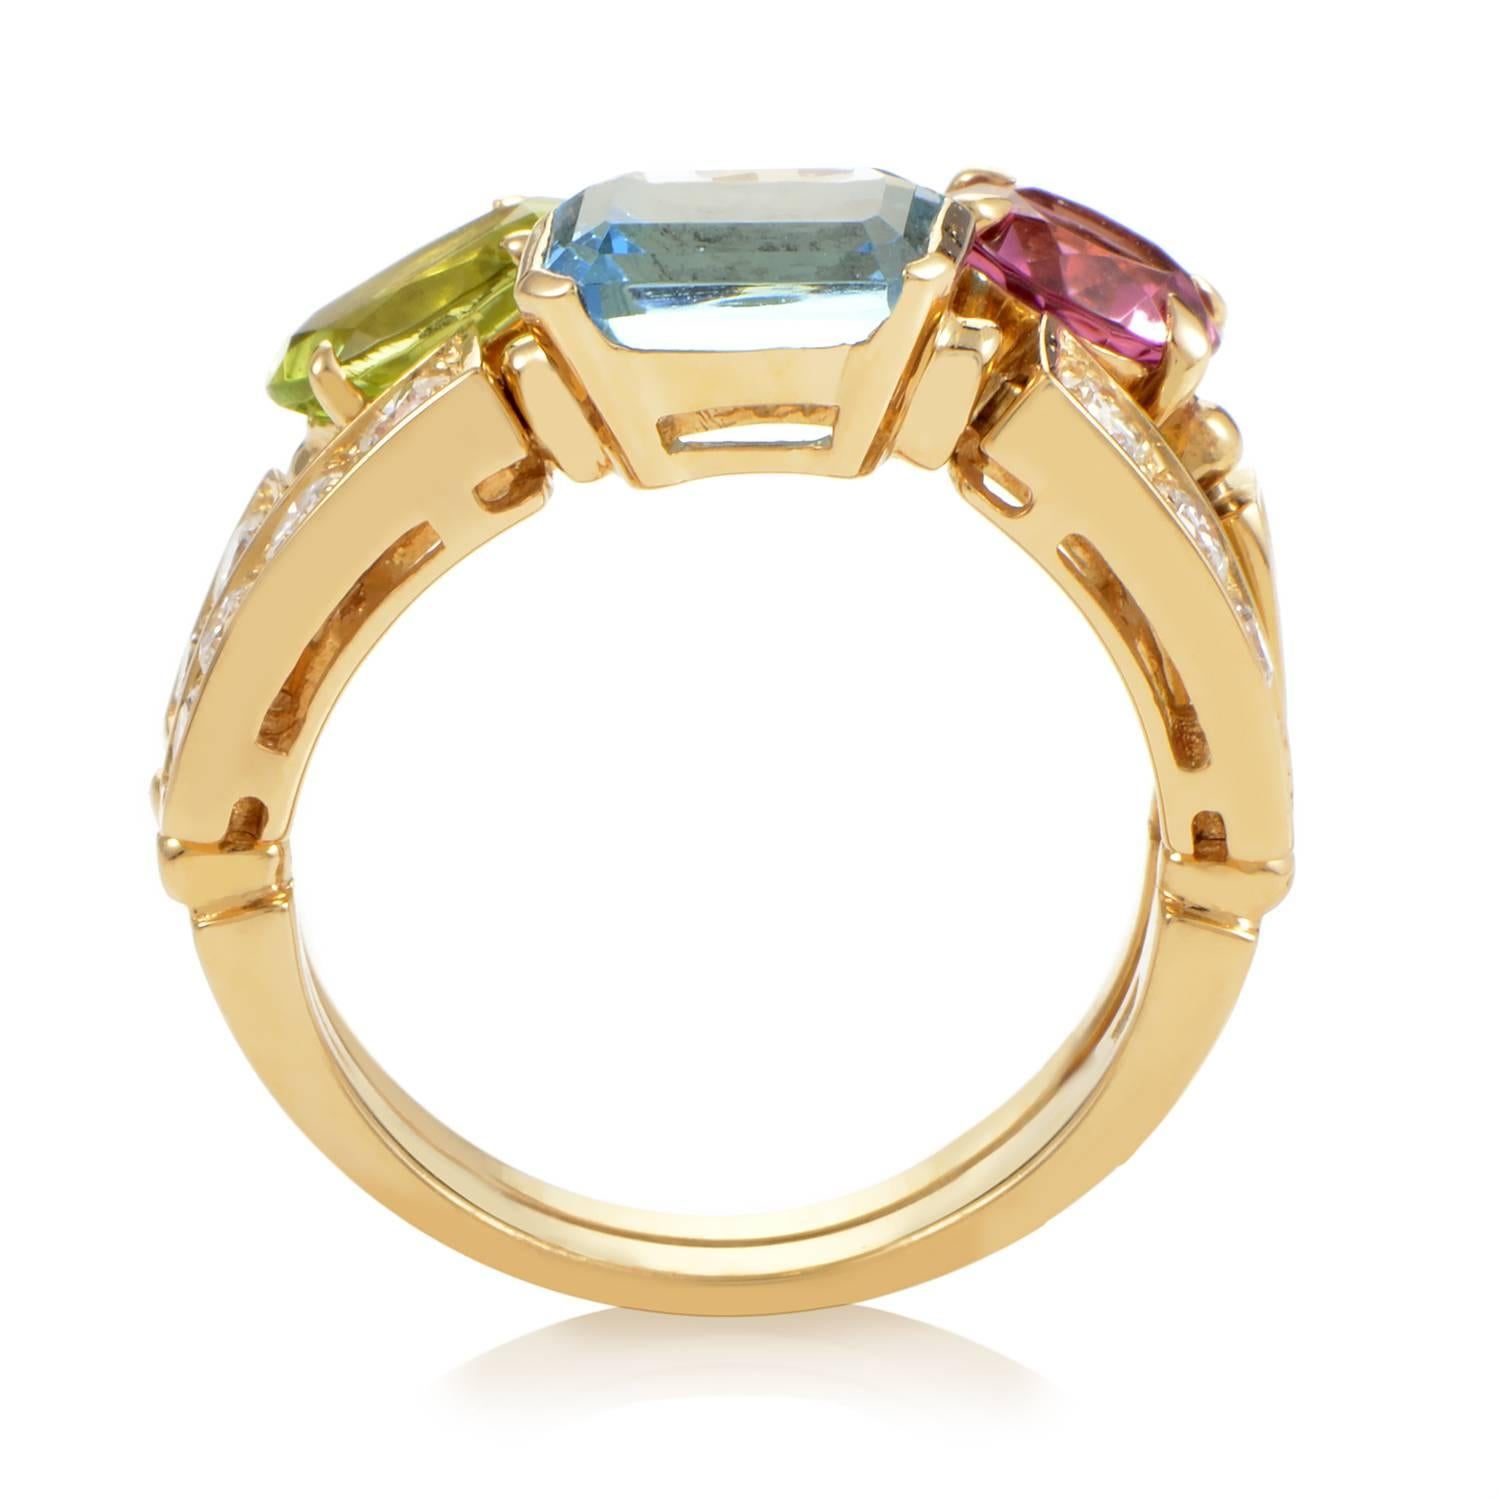 A complex study in spectacular design, this Bulgari ring is sure to captivate. The band of 18K Yellow Gold rises in two expanding threads that are quickly broken up into their respective segments of varying size, length and color. Multi-colored